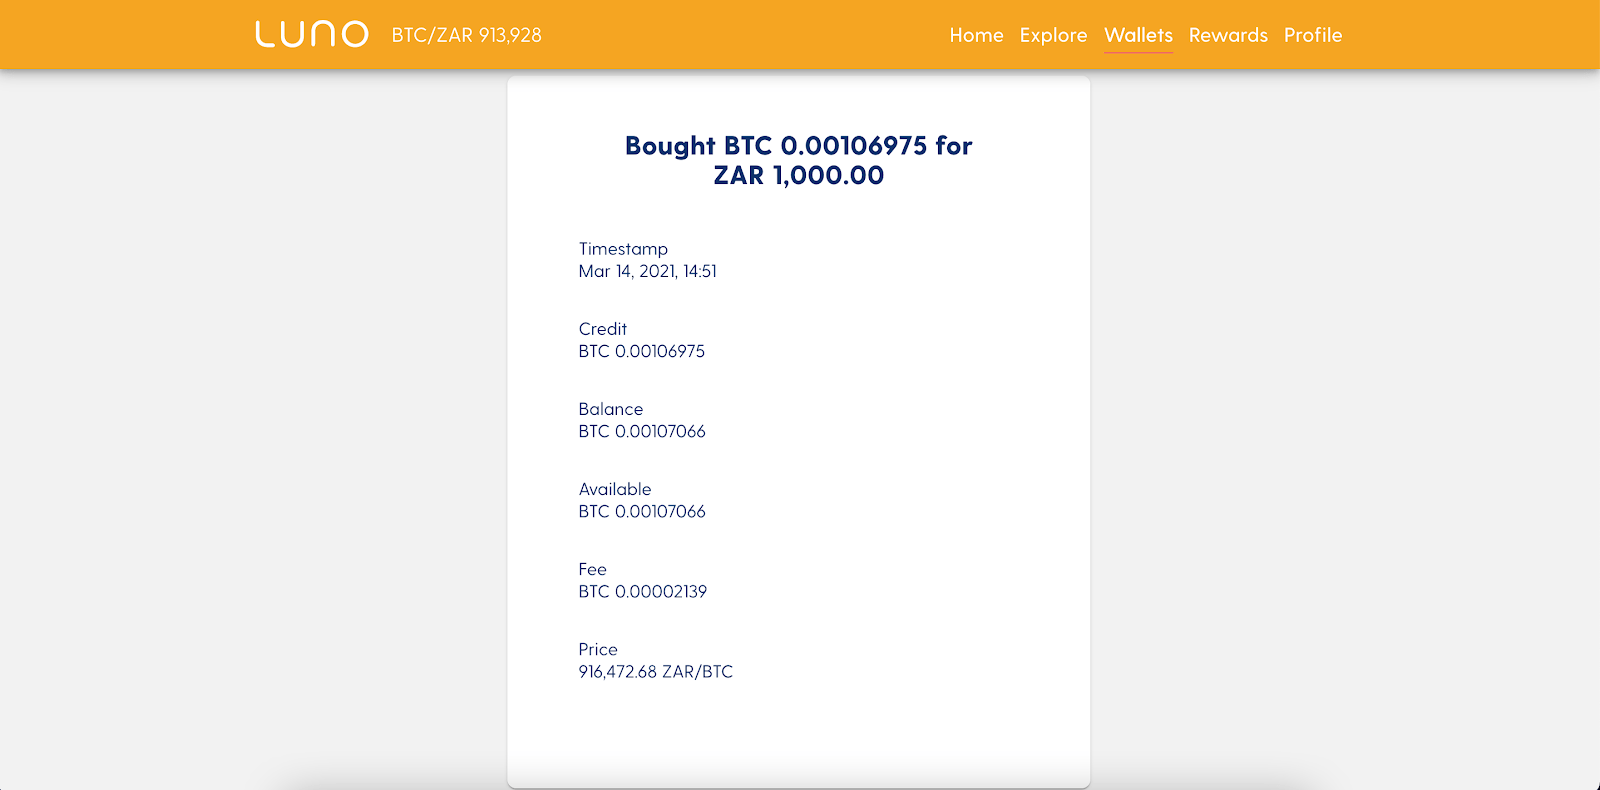 Screenshot of the BTC purchase order from Luno.